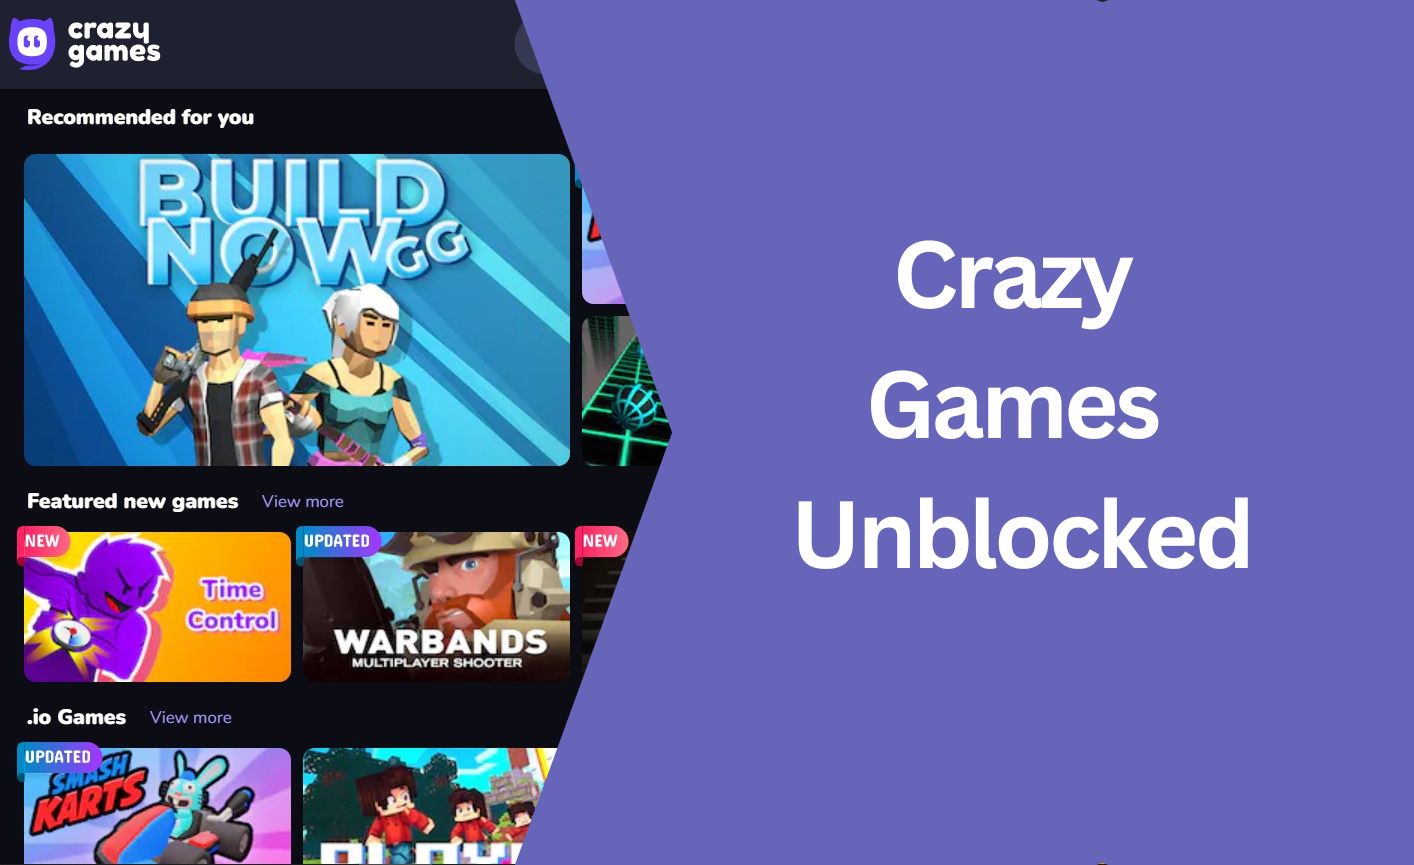 Crazy Games Unblocked WTF, 911, 66 What is It? and how to play online